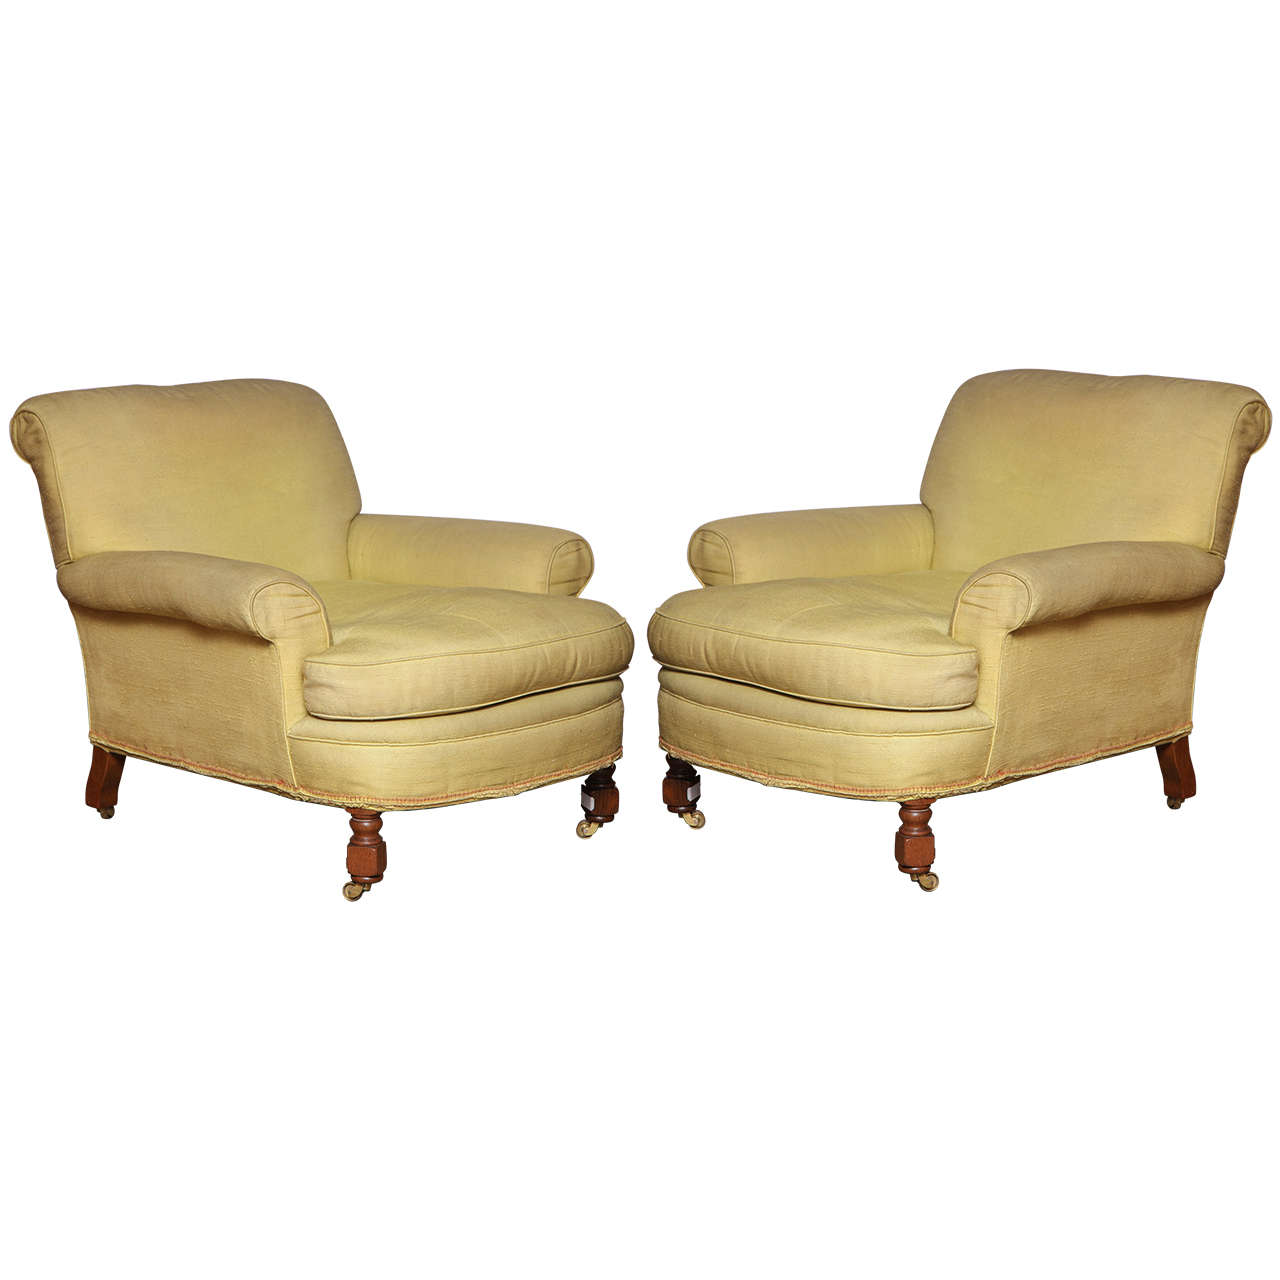 Pair of 19th Century Upholstered Chairs